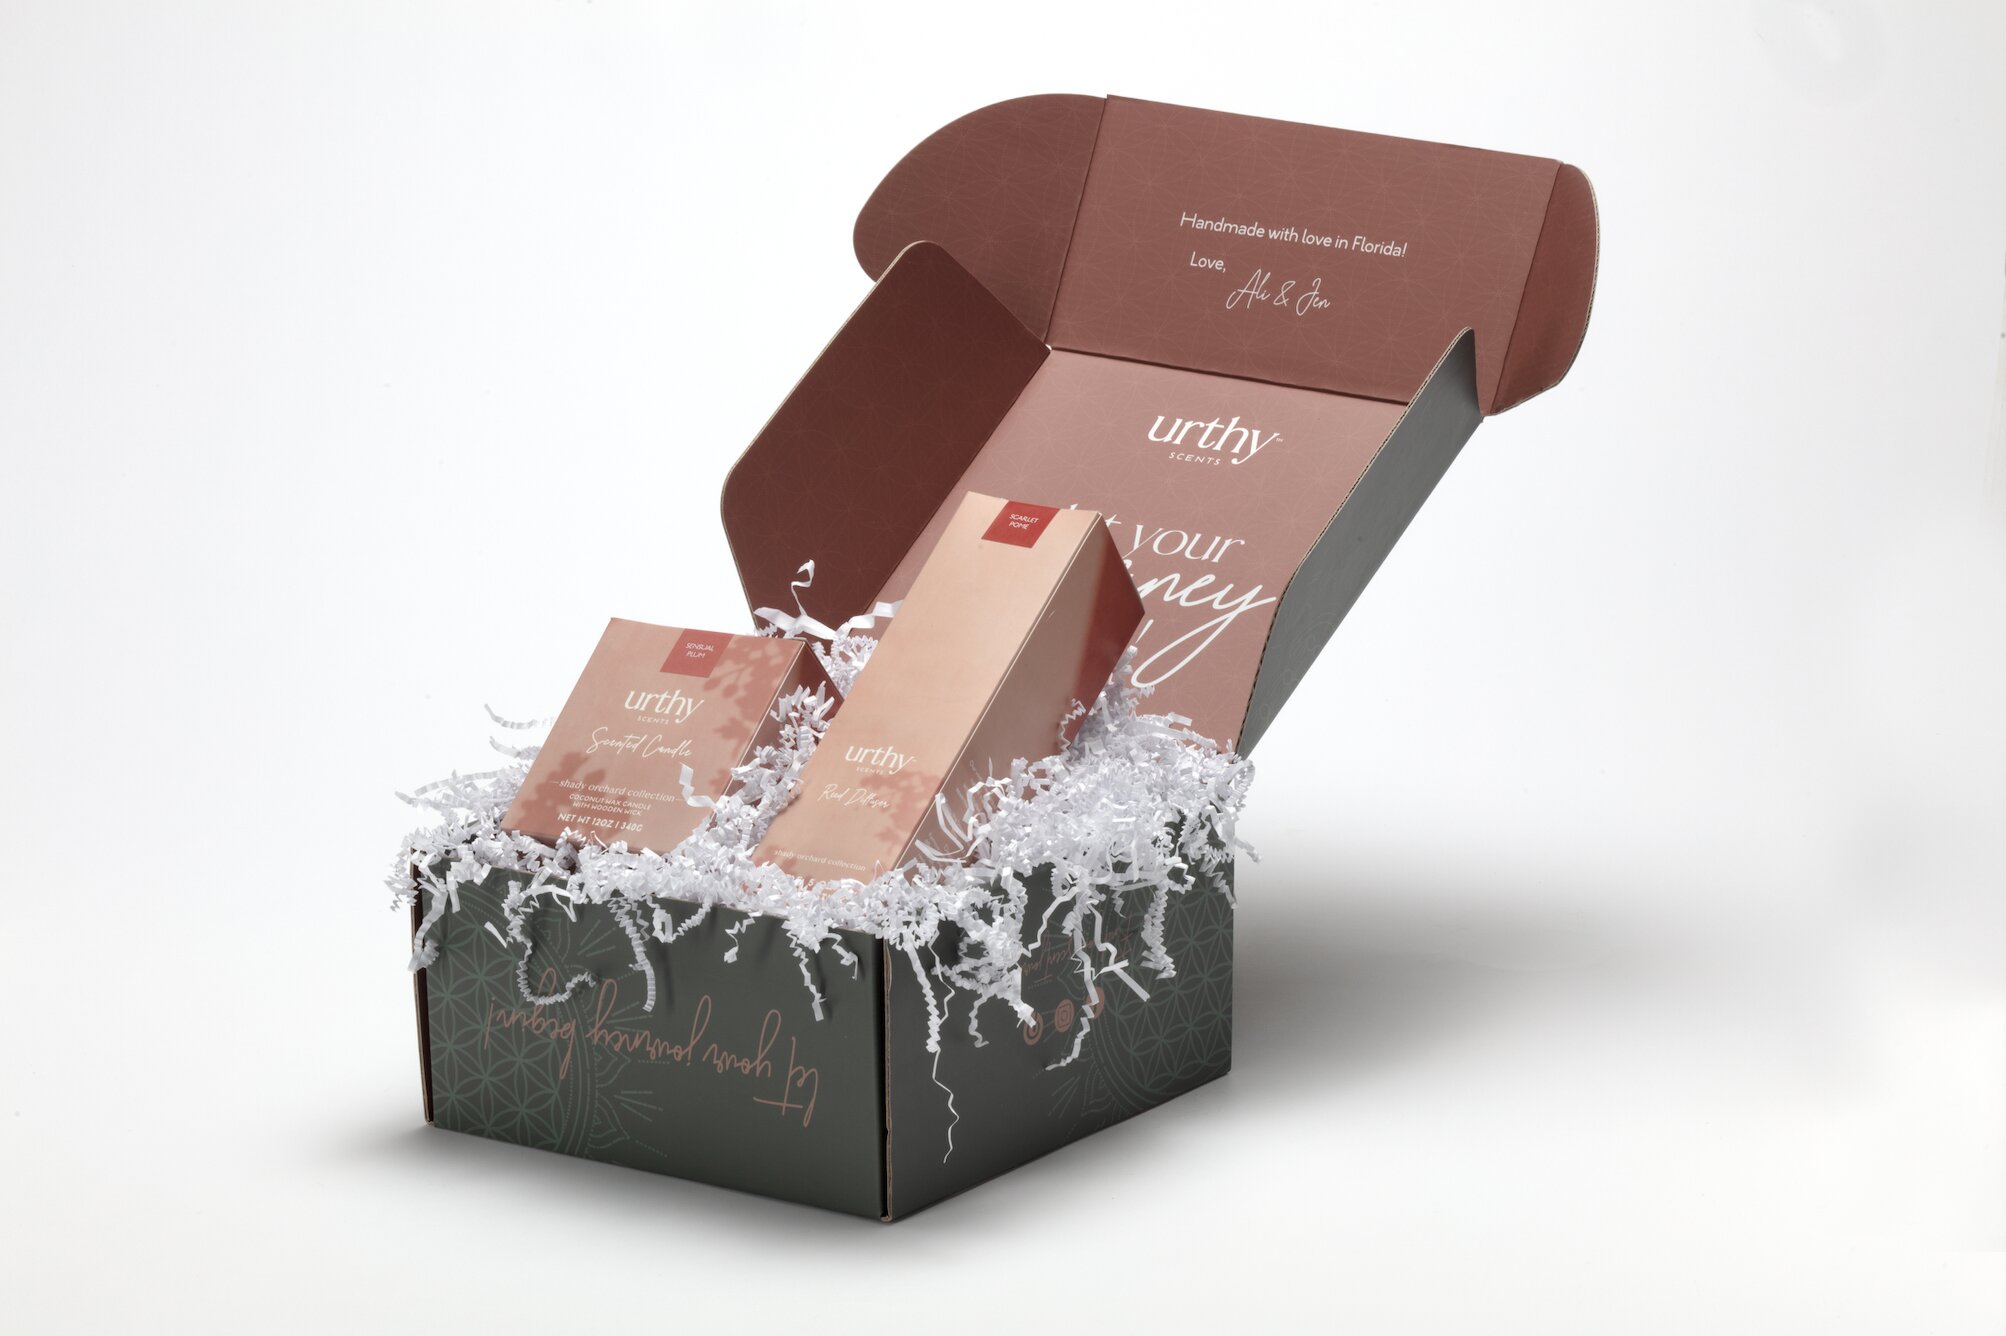 Urthy Scents’ Refresher Gift Set for Mother's Day